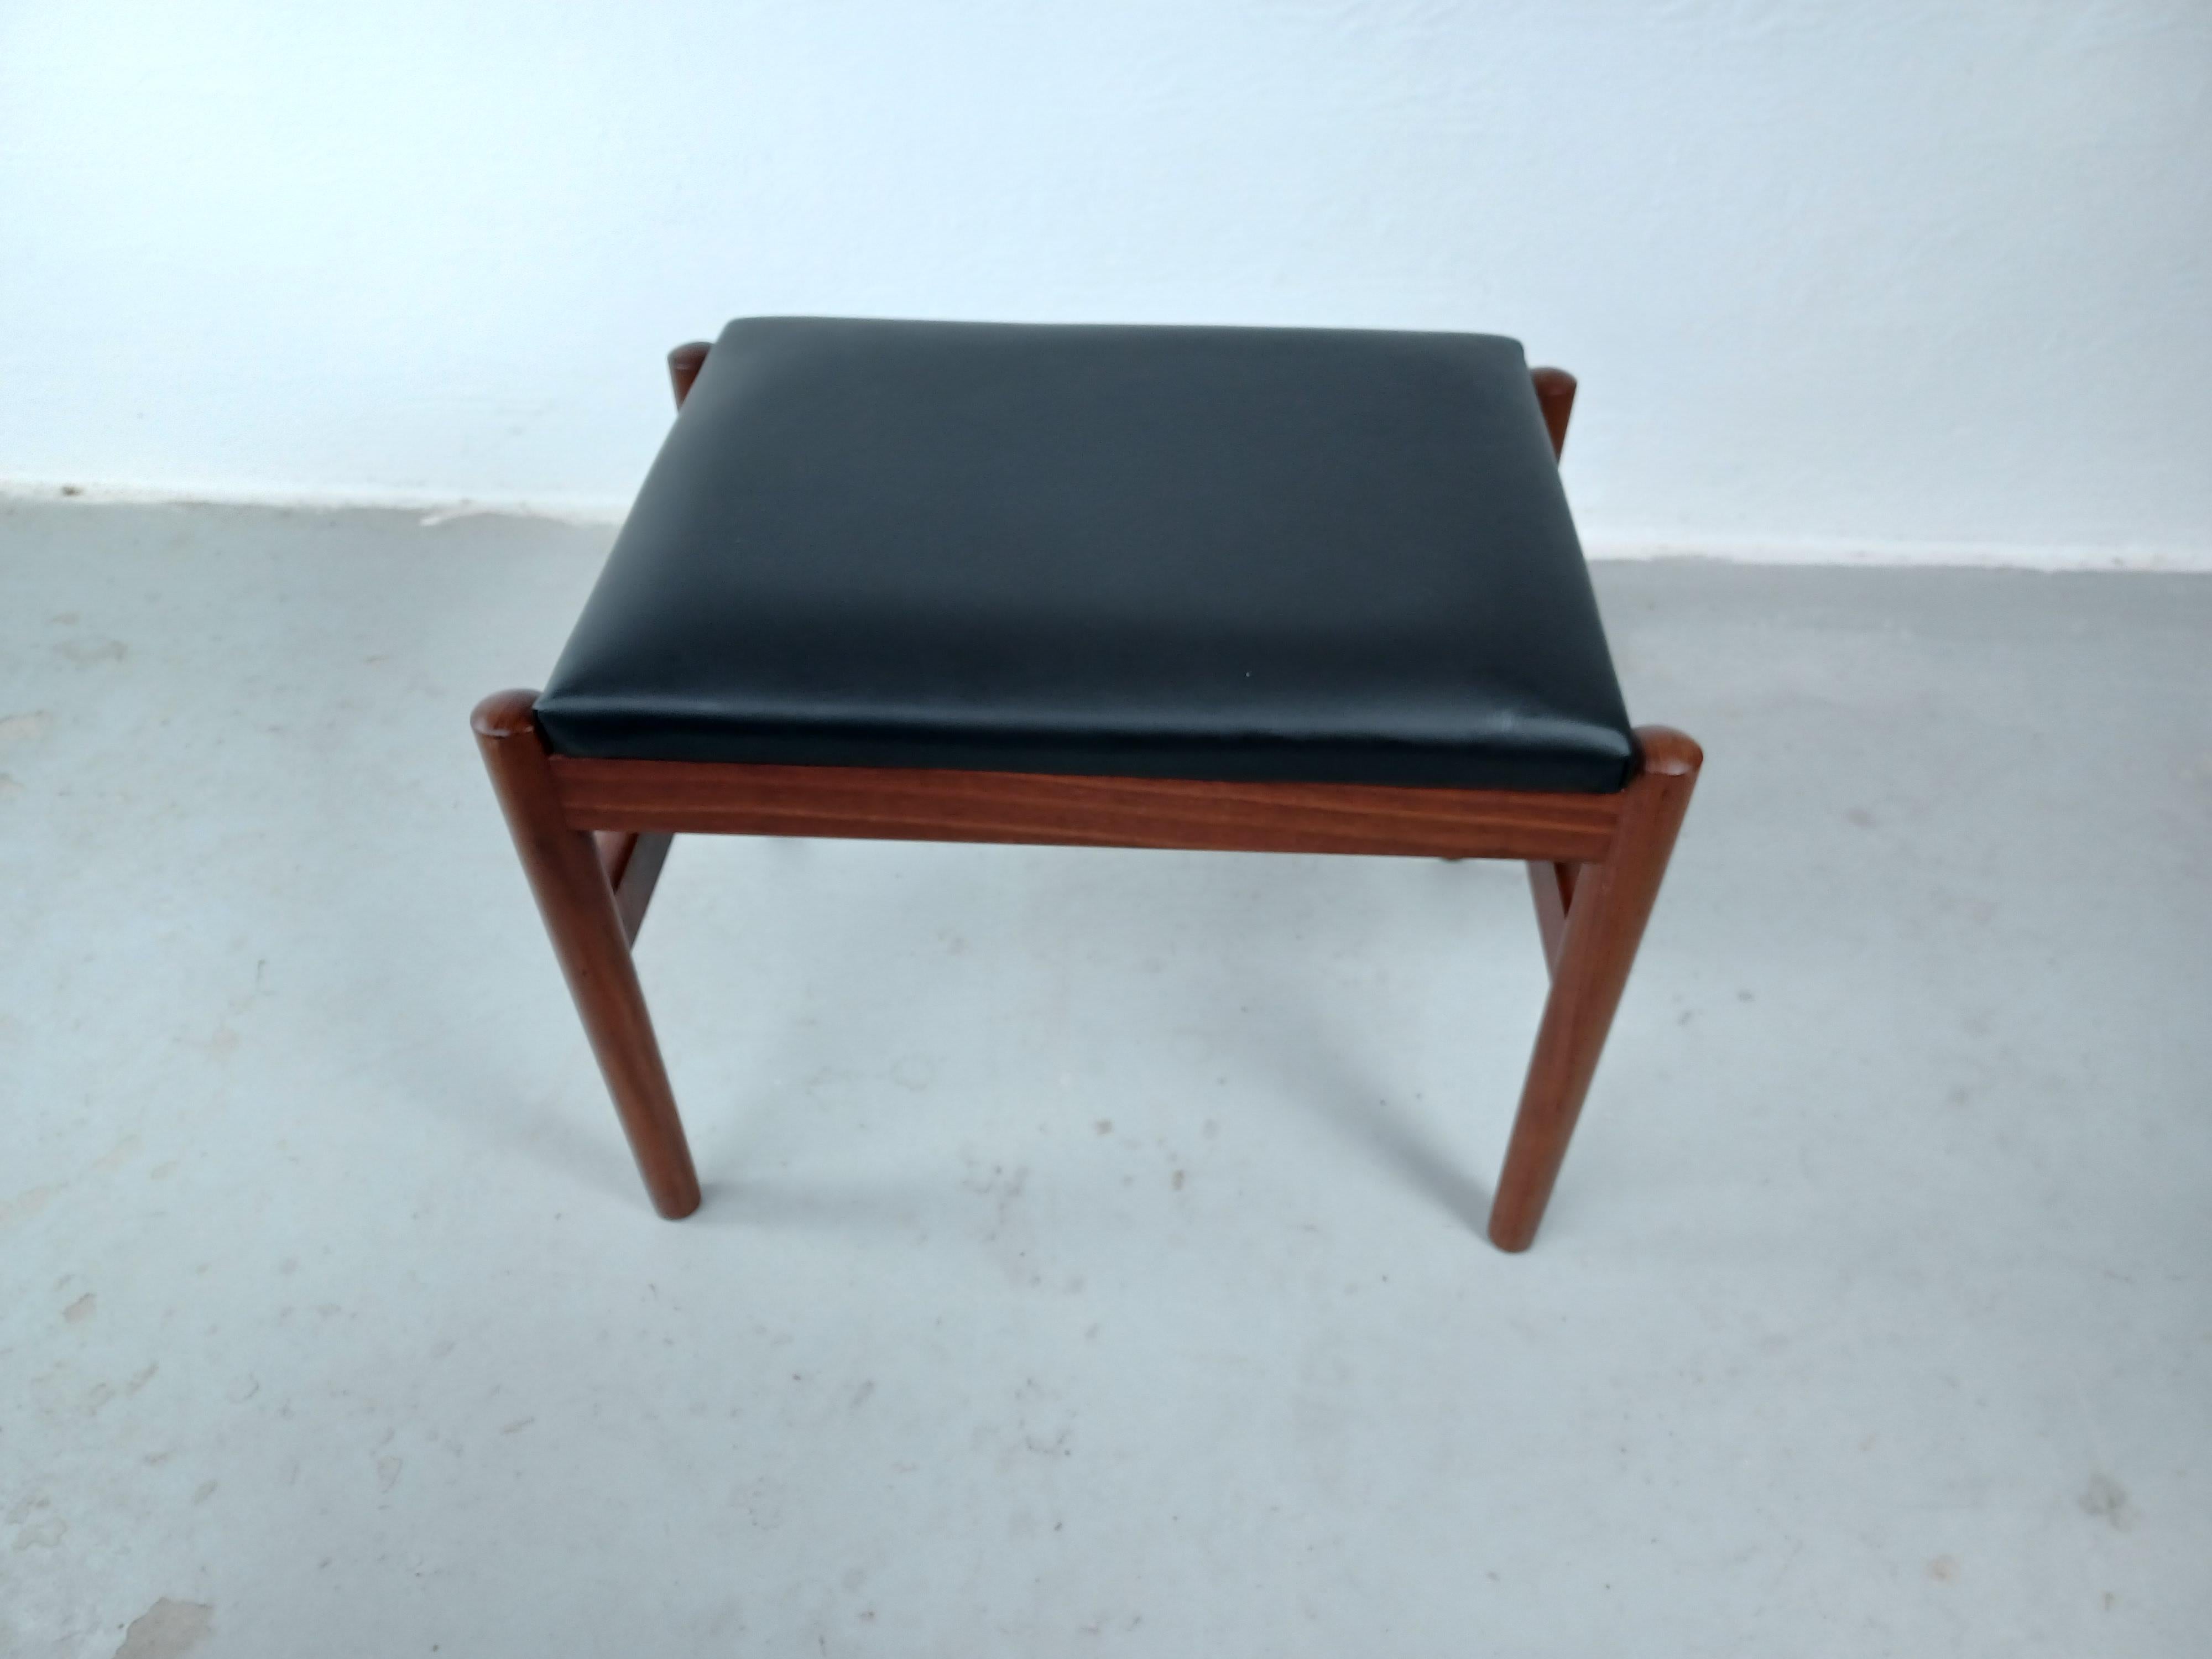 1960s, Restored Danish Teak Footstool Reupholstered in Black Leather In Good Condition For Sale In Knebel, DK